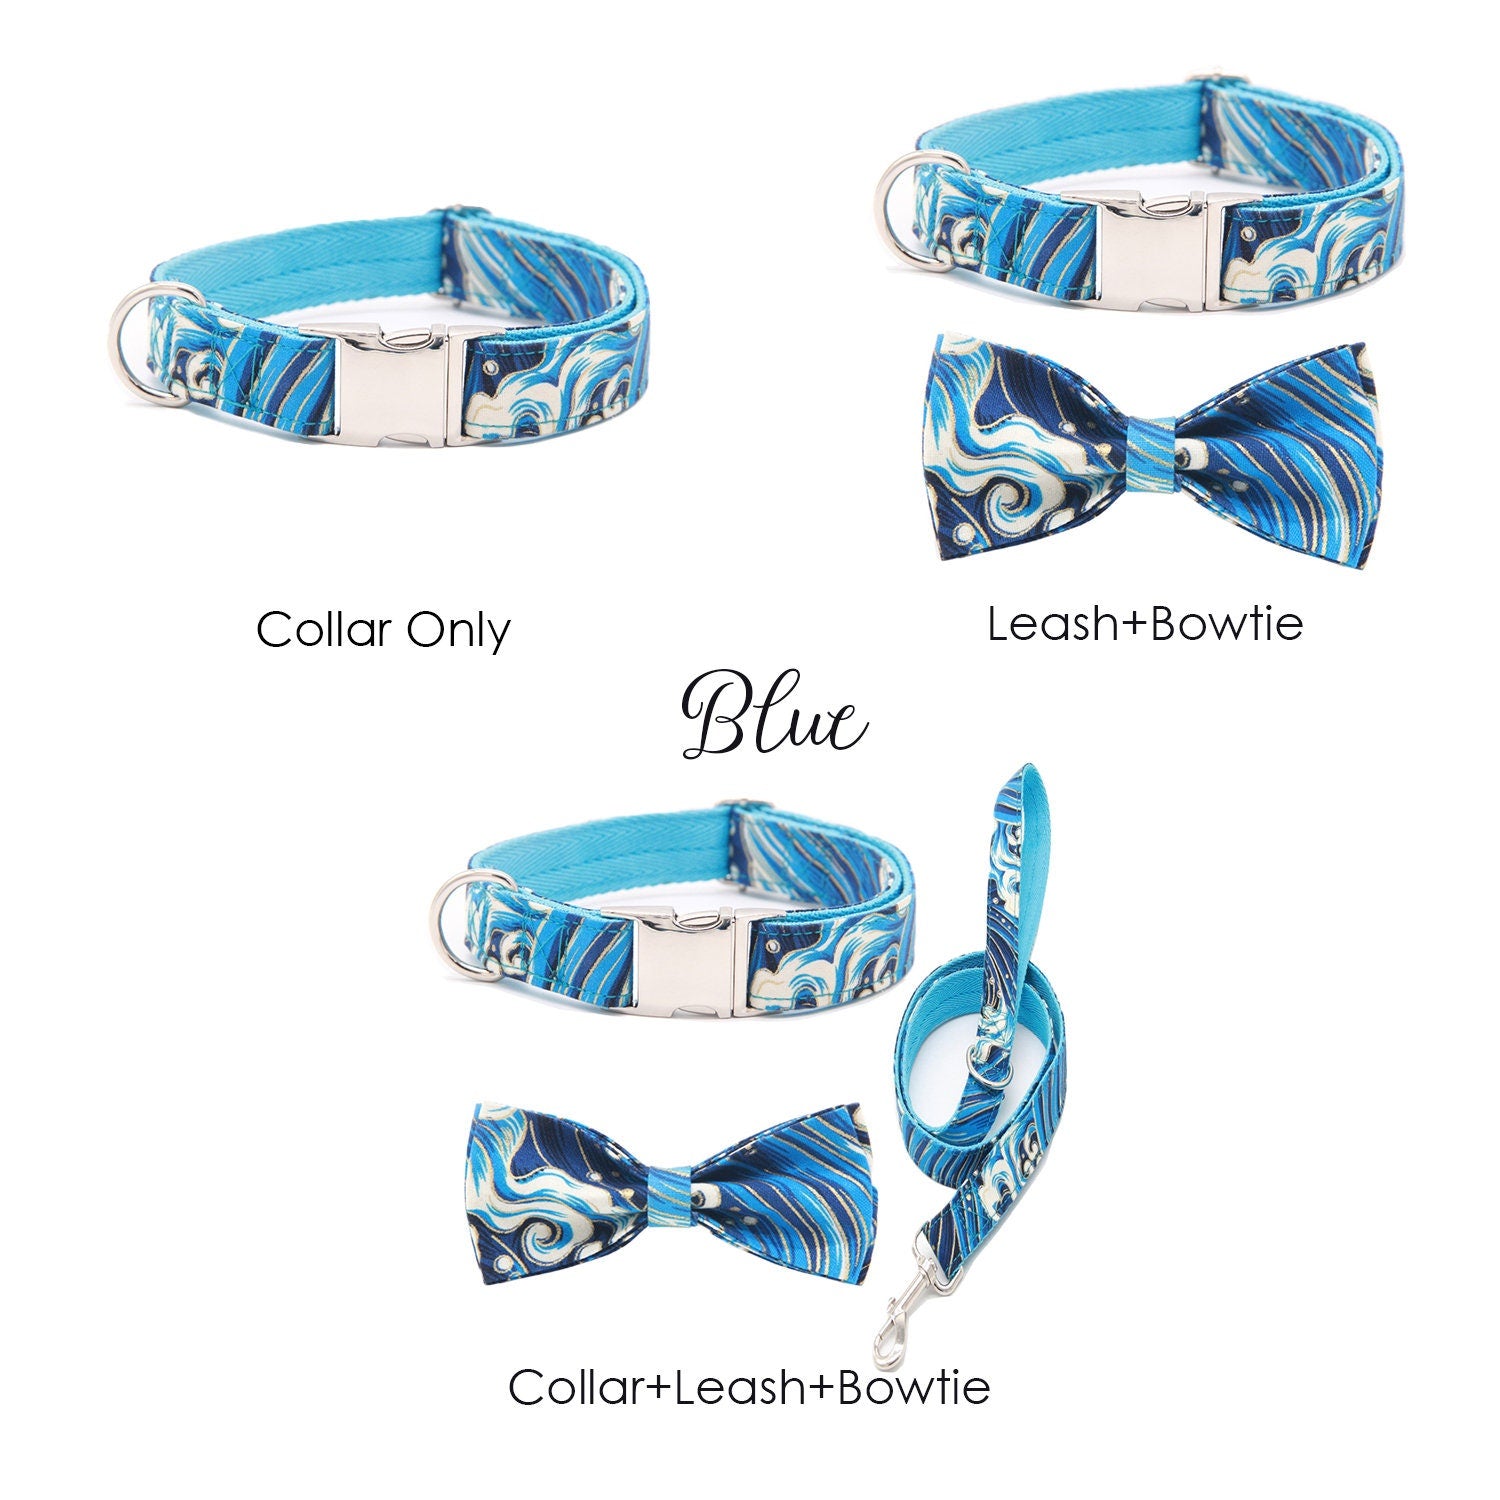 Personalized Engraved Handmade Dog Collar and Leash set, Matching Bowtie in Reb, Blue Pink Purple and Japan Pattern, Great for all Occasions